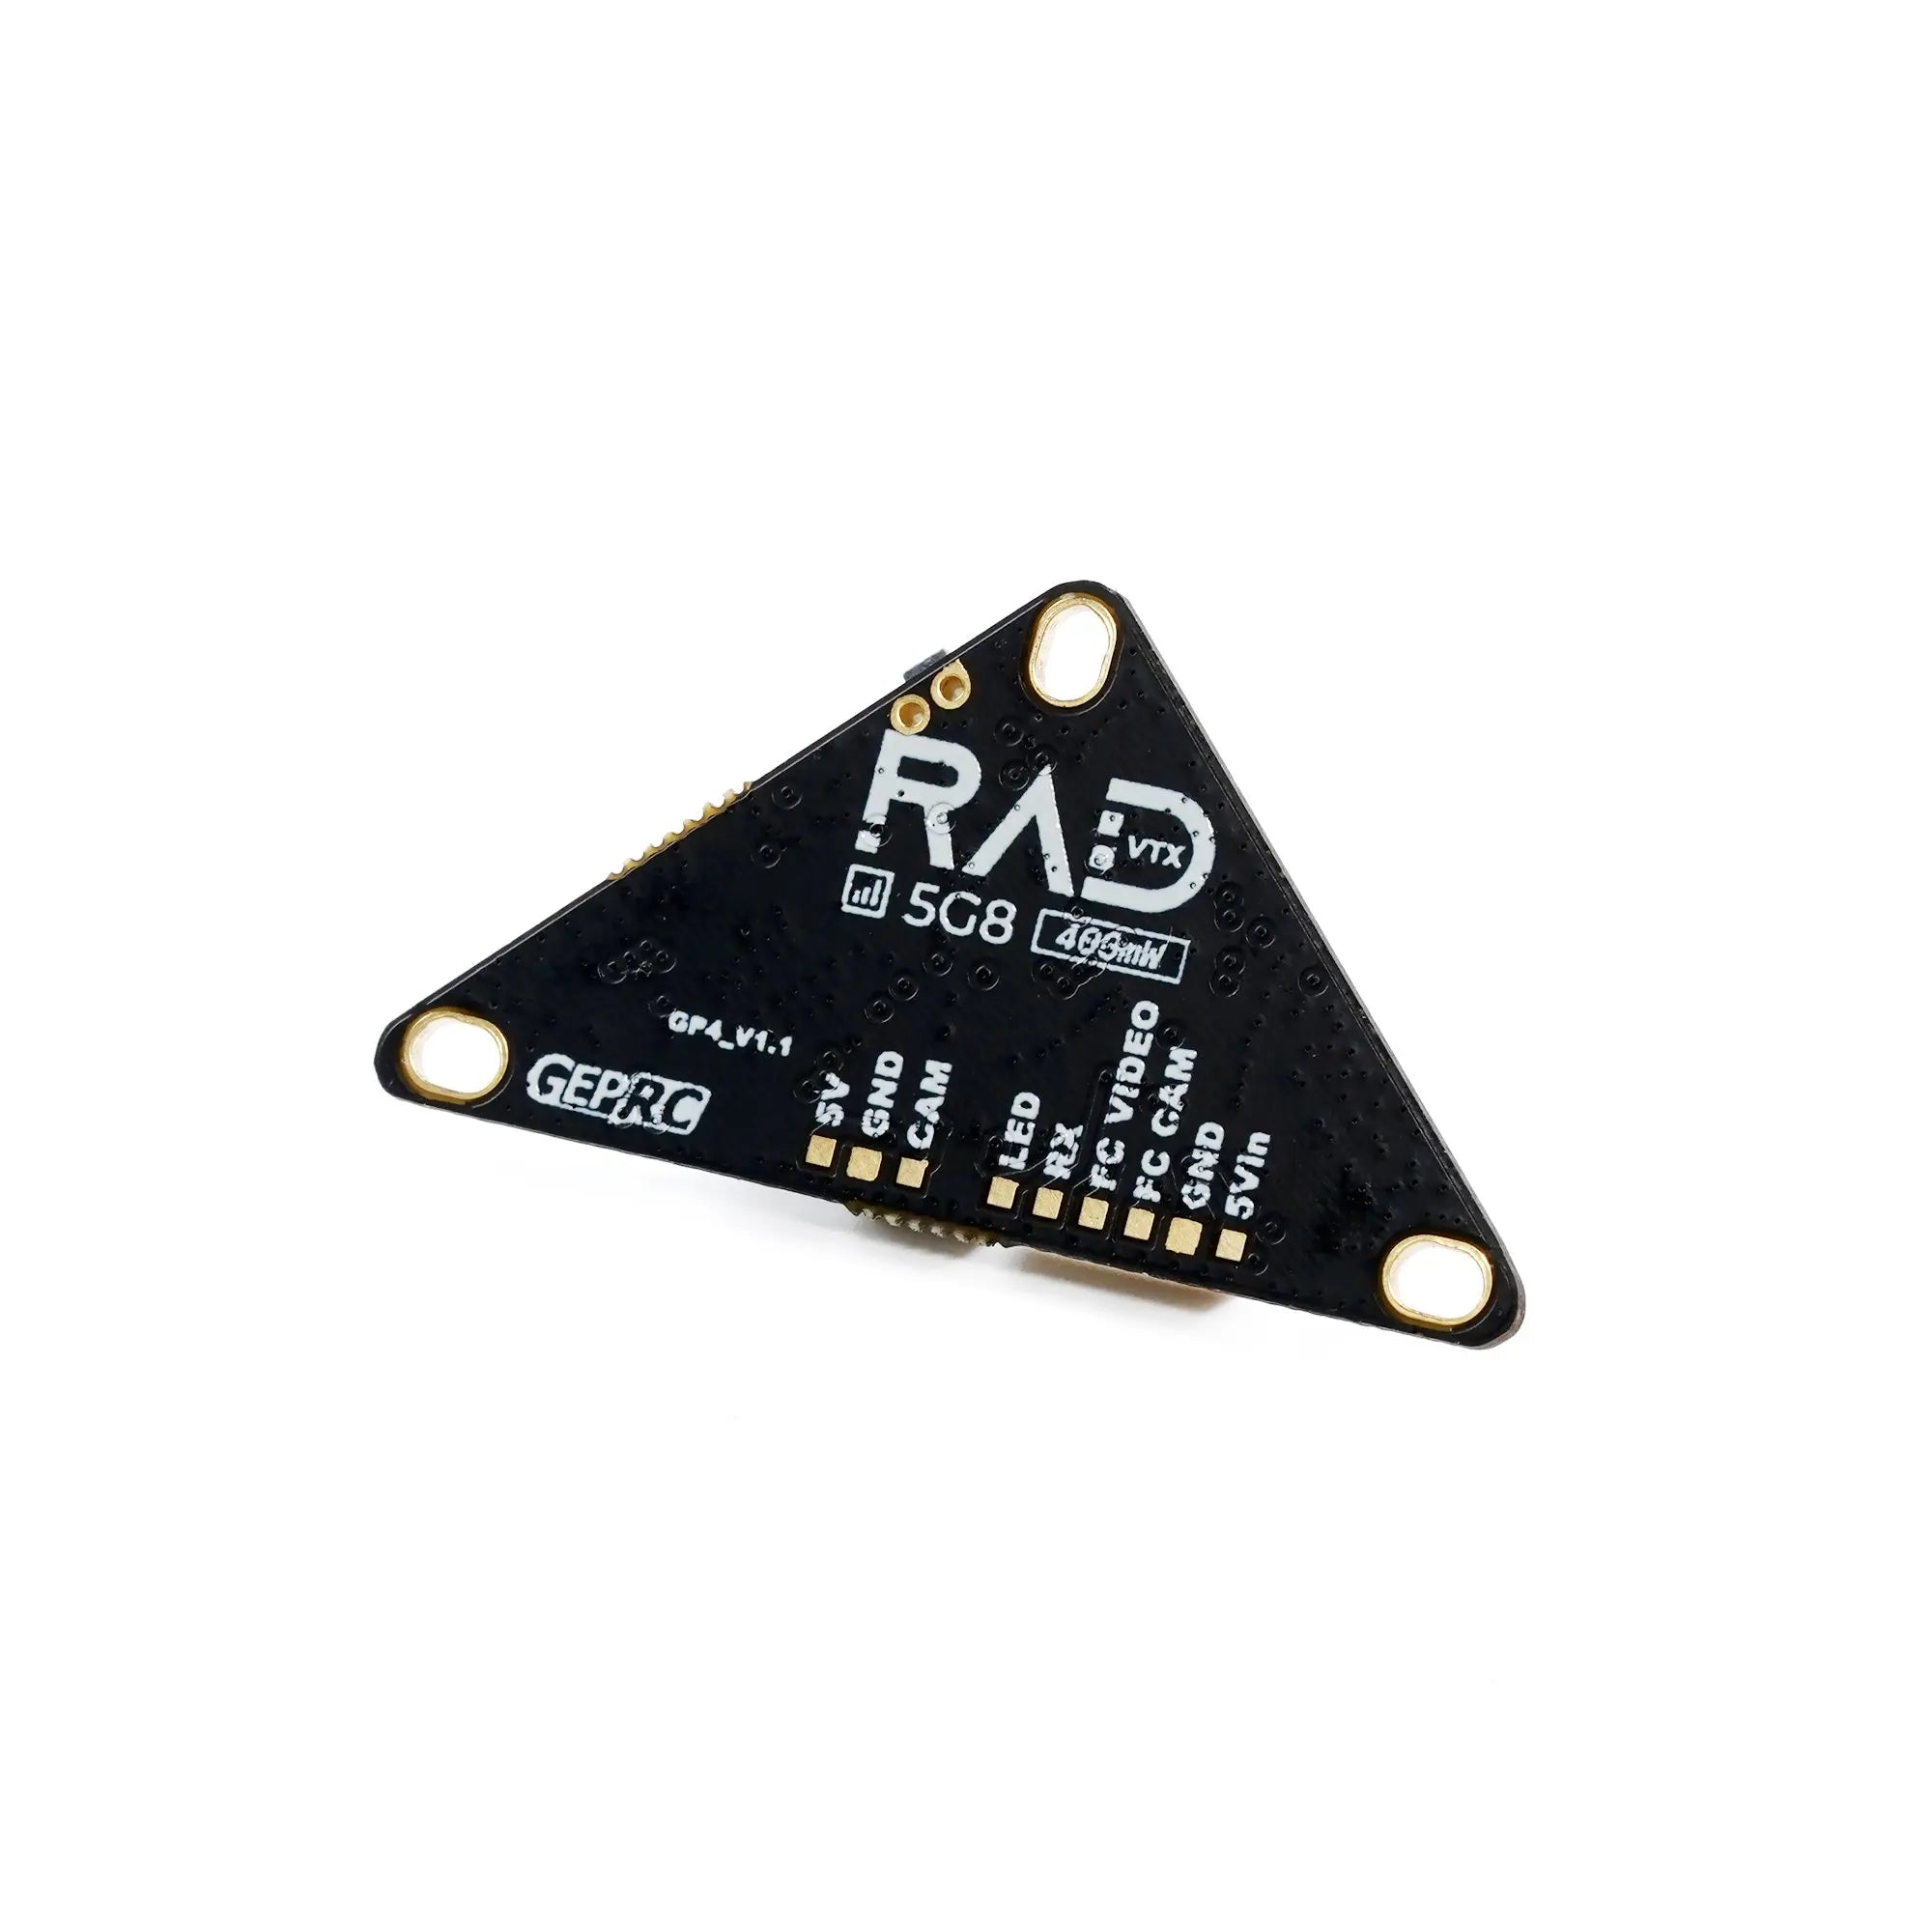 GEPRC RAD Whoop 5.8G VTX, 400mW power, low heat generation, stable operation, suitable for short and medium range flight